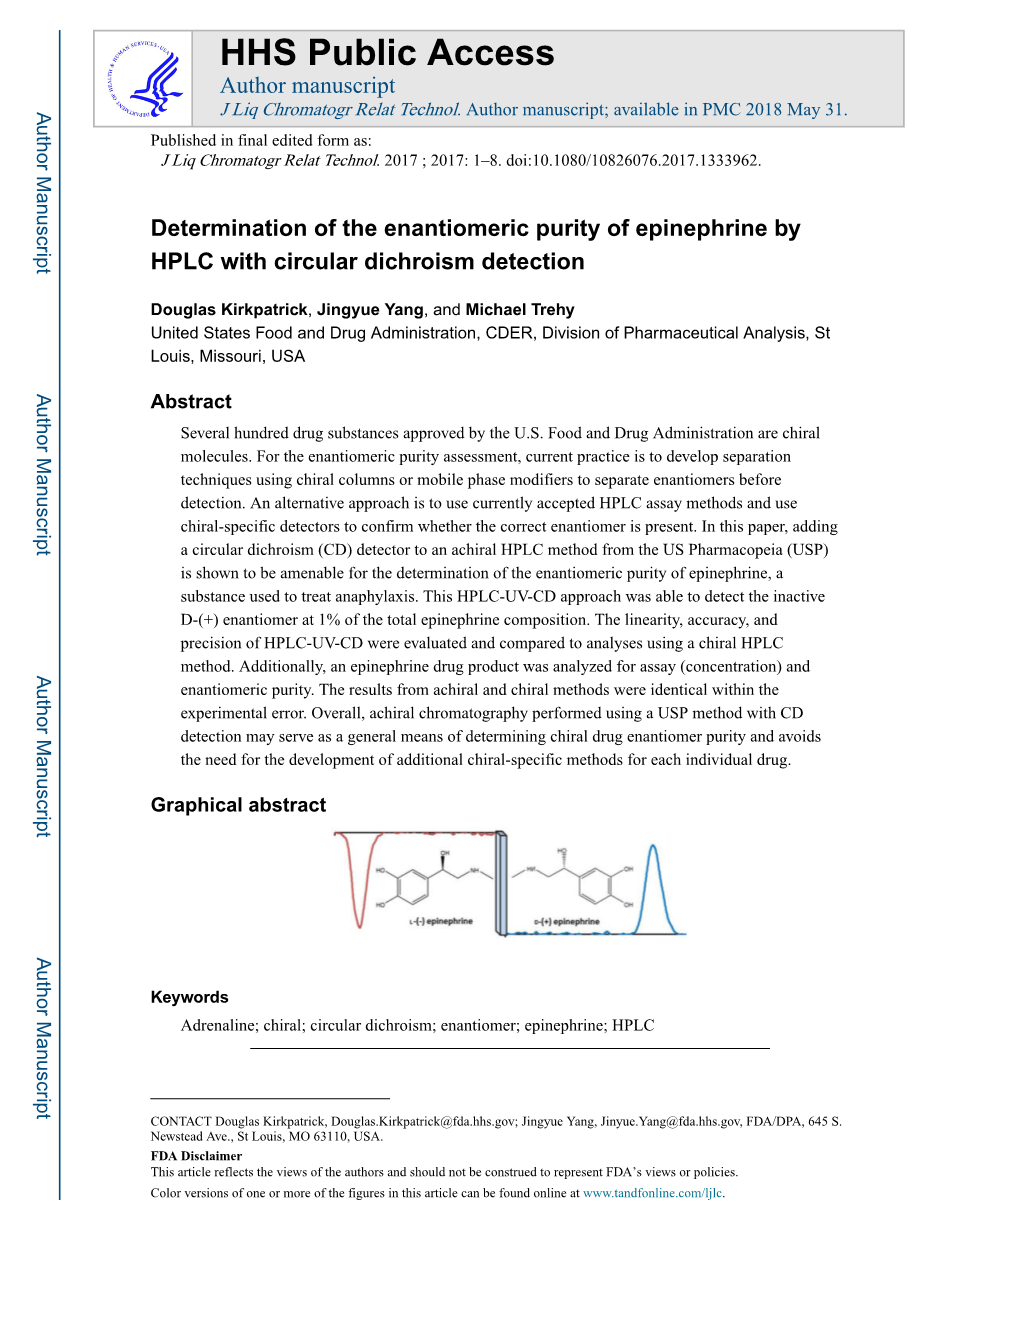 Determination of the Enantiomeric Purity of Epinephrine by HPLC with Circular Dichroism Detection